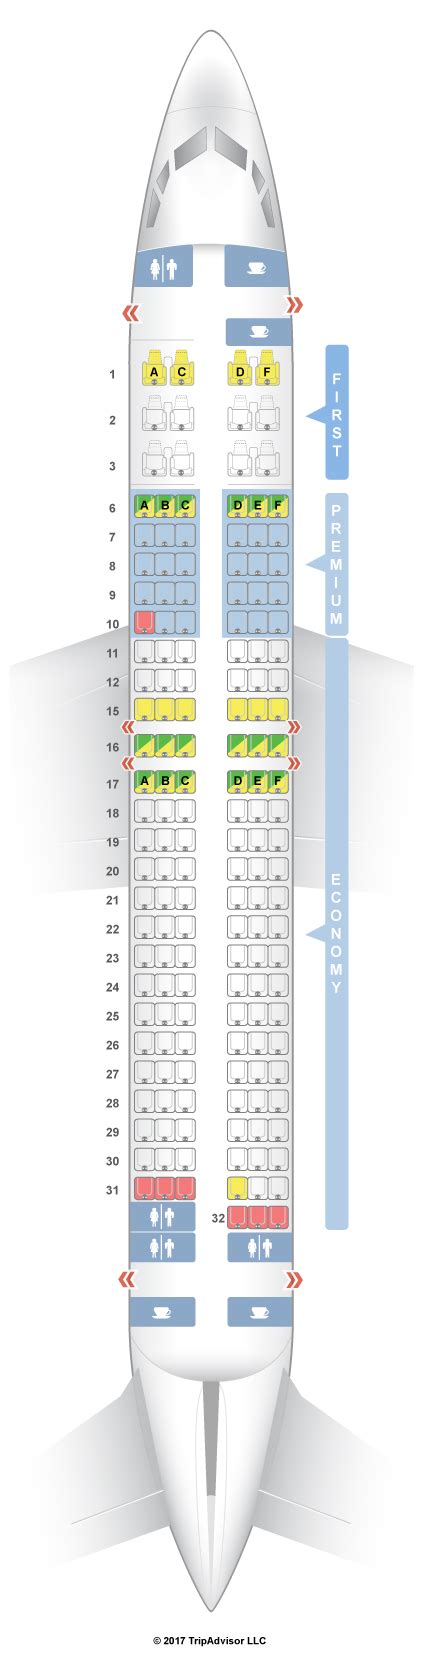 boeing 737-800 seating chart alaska airlines